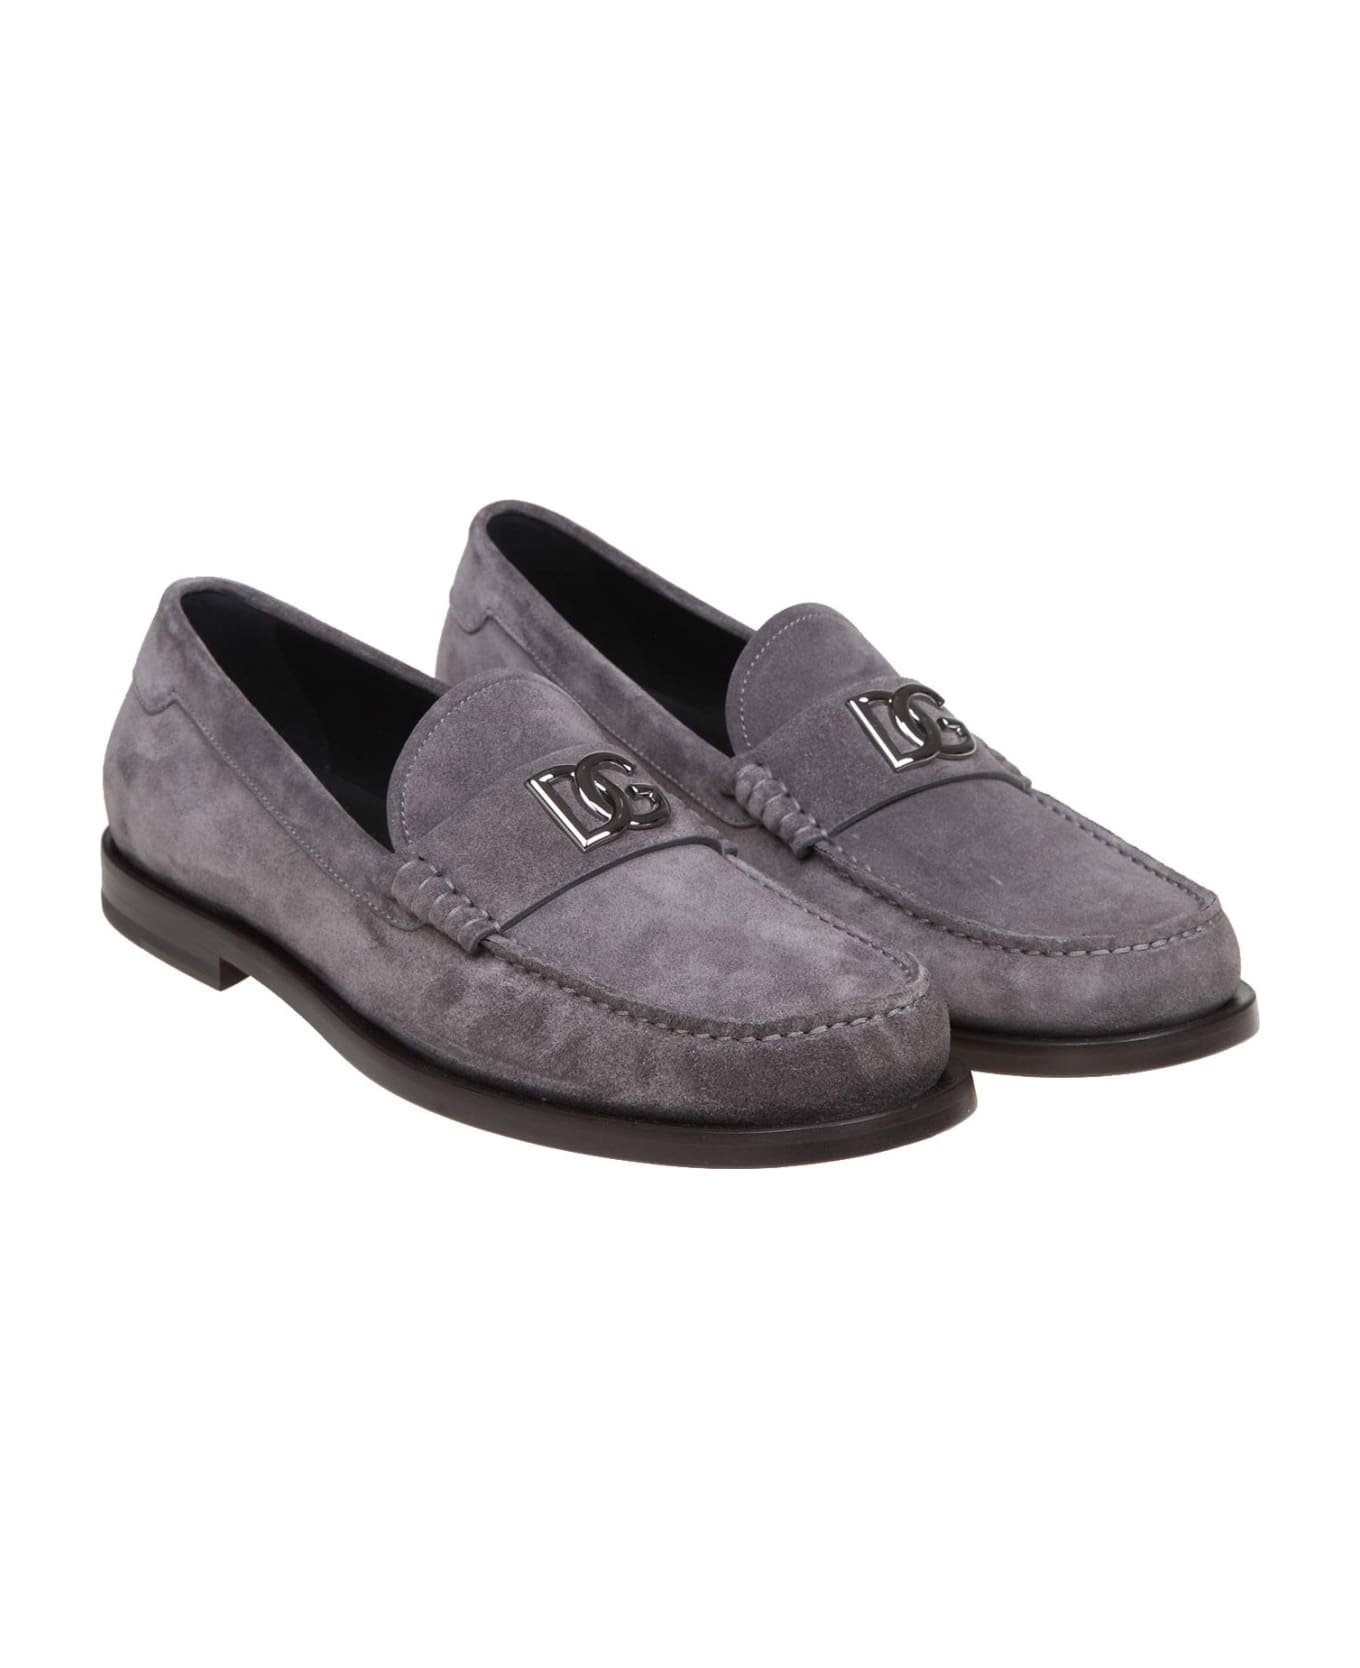 Dolce & Gabbana Suede Loafers With Dg Logo - Grey ローファー＆デッキシューズ